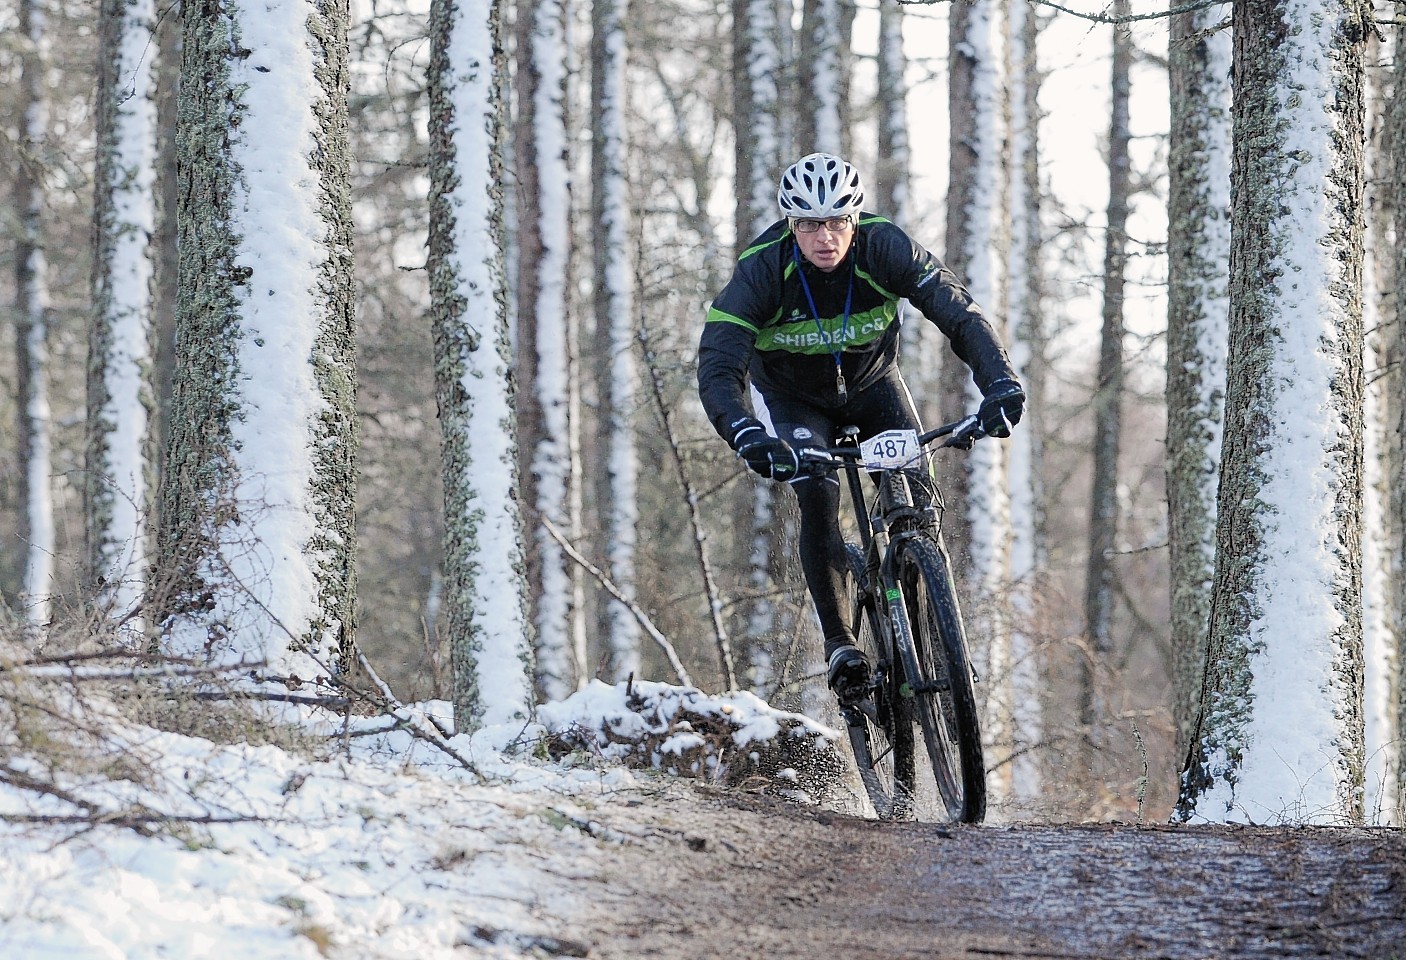 A competitor makes his way around the 2015 Strathpuffer course